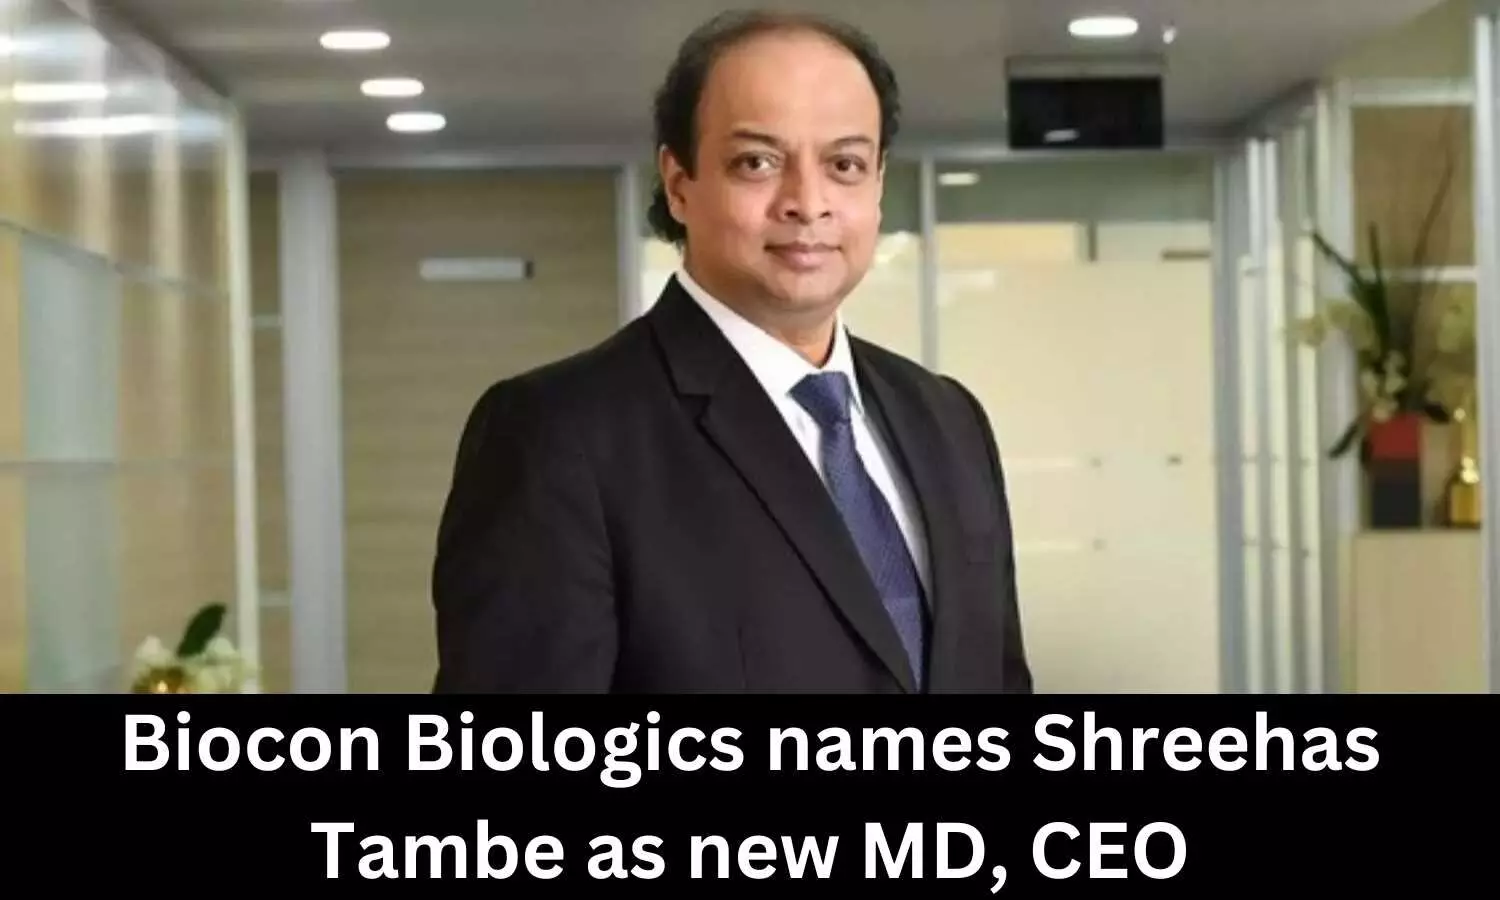 Biocon Biologics appoints Shreehas Tambe as new MD, CEO